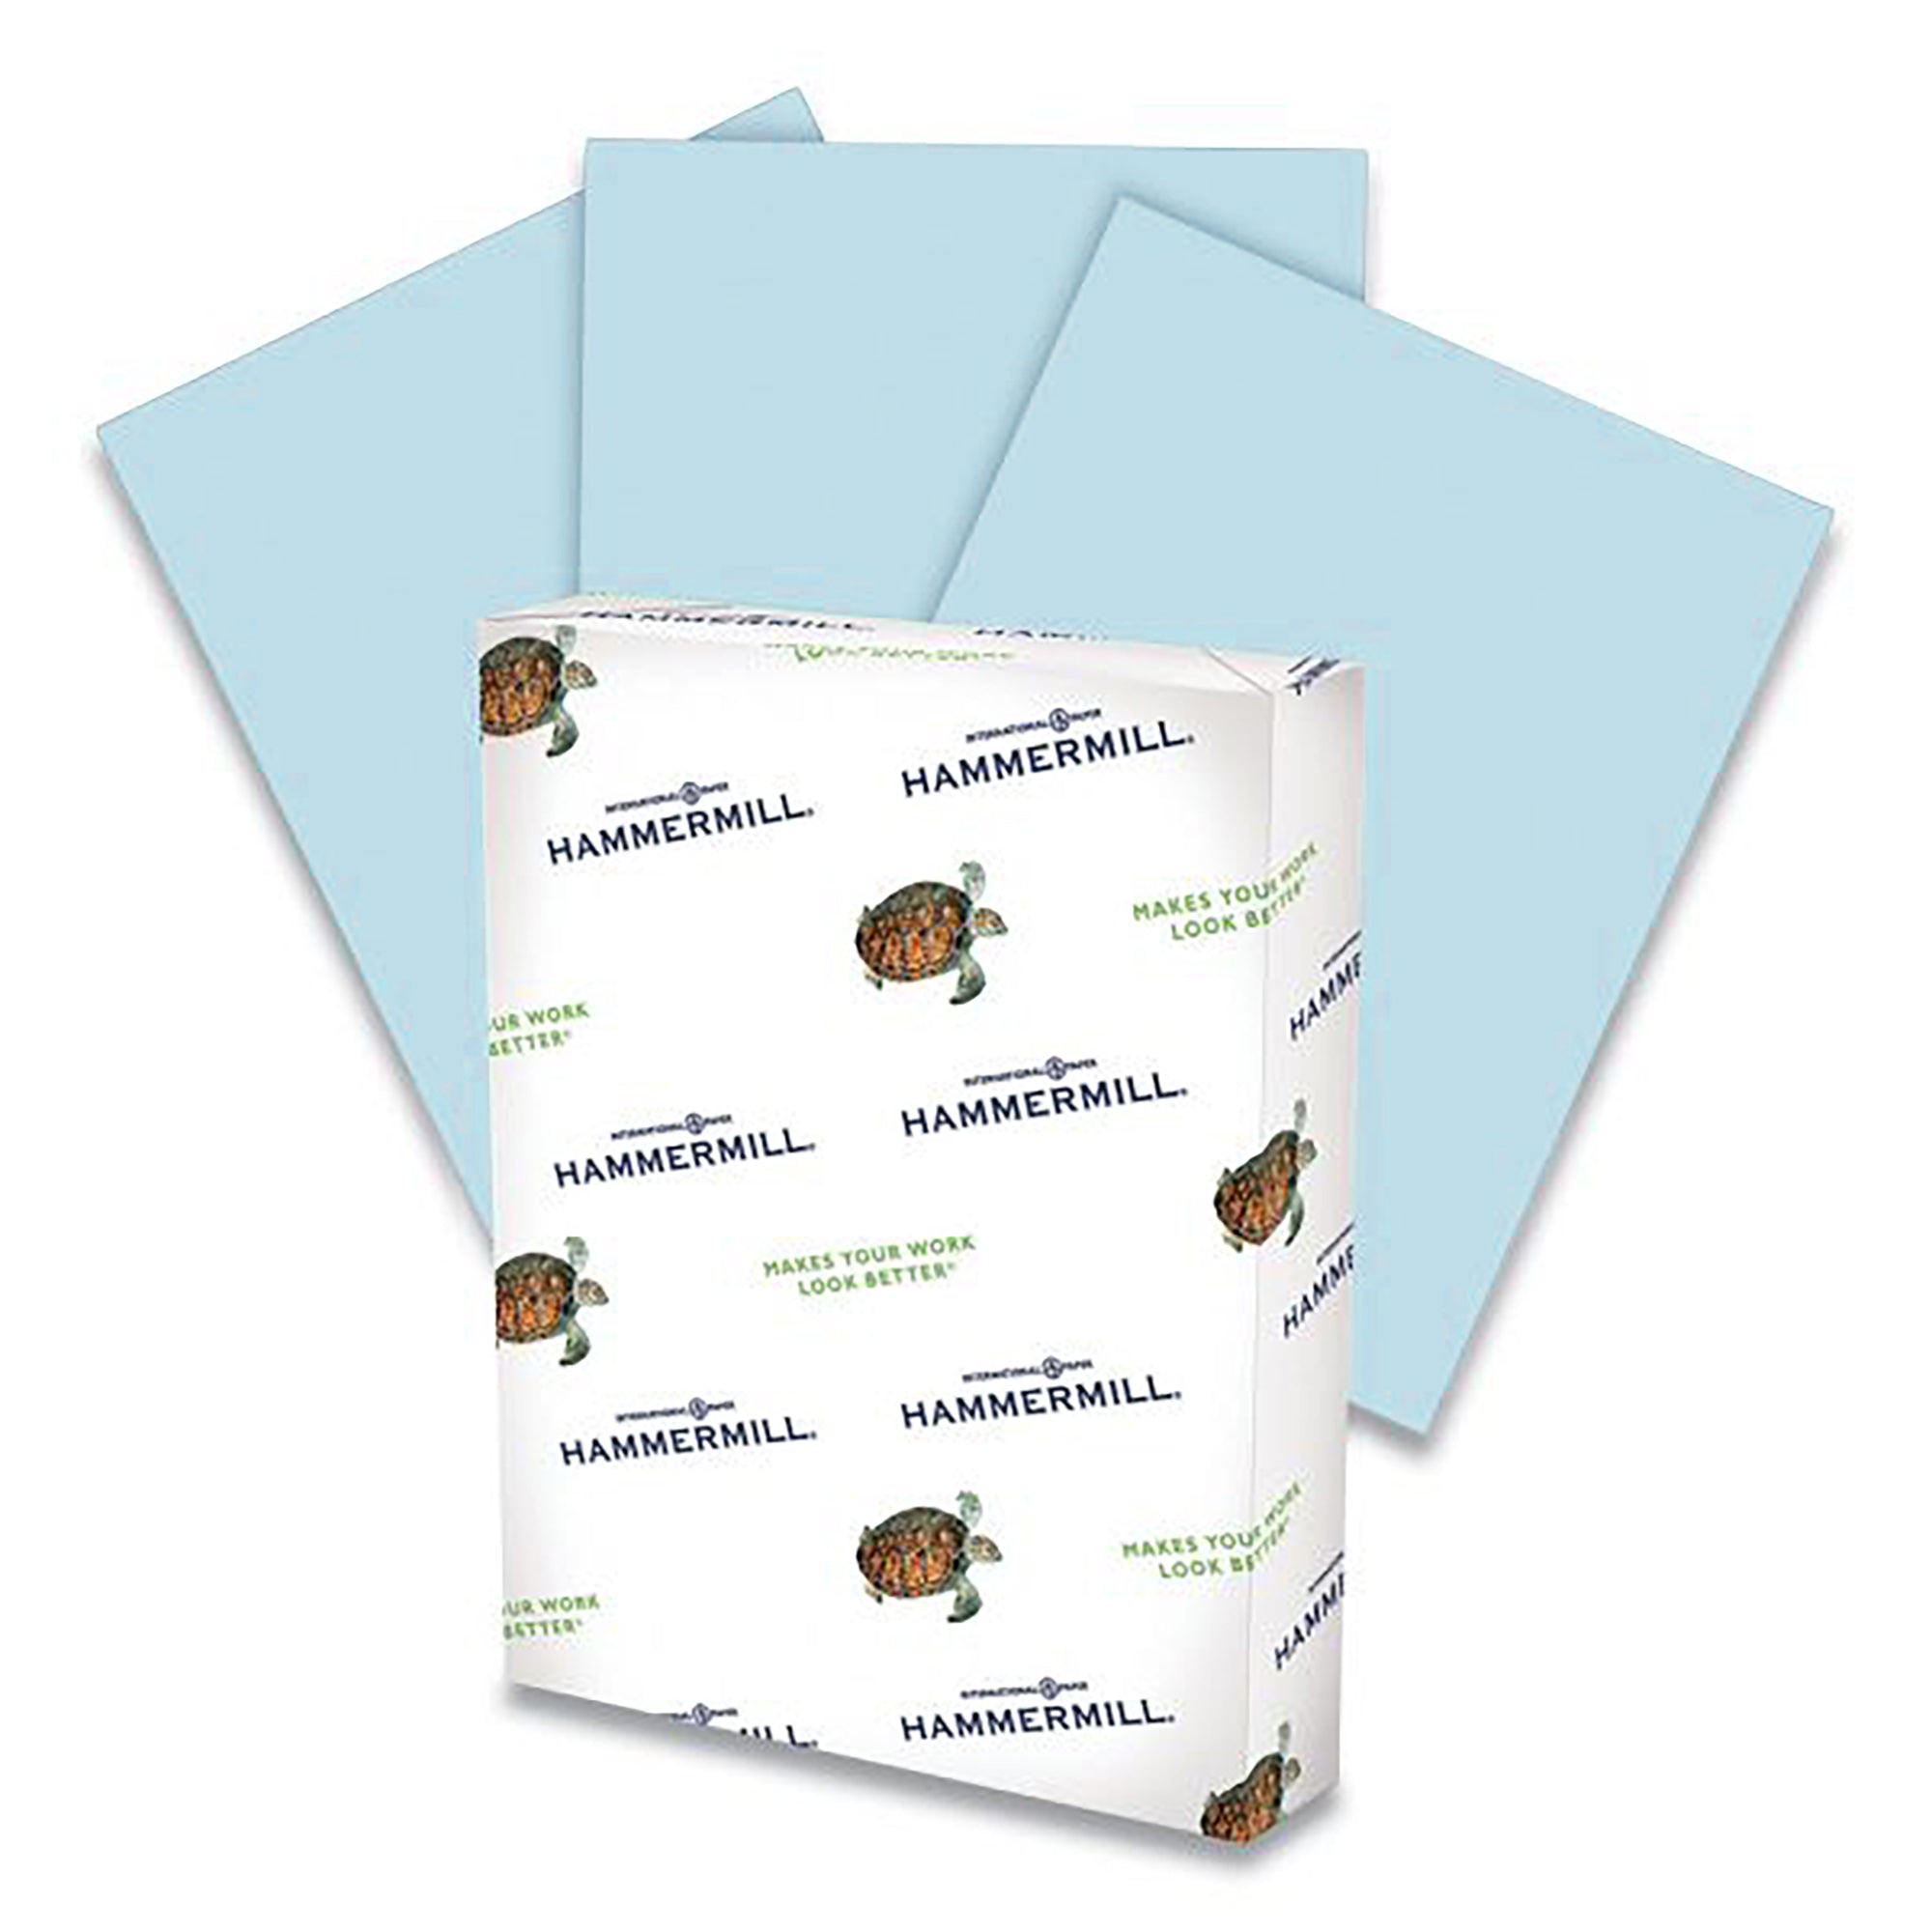 A4 Size Premium Printer Paper - Great for Printing Professional Documents -  2